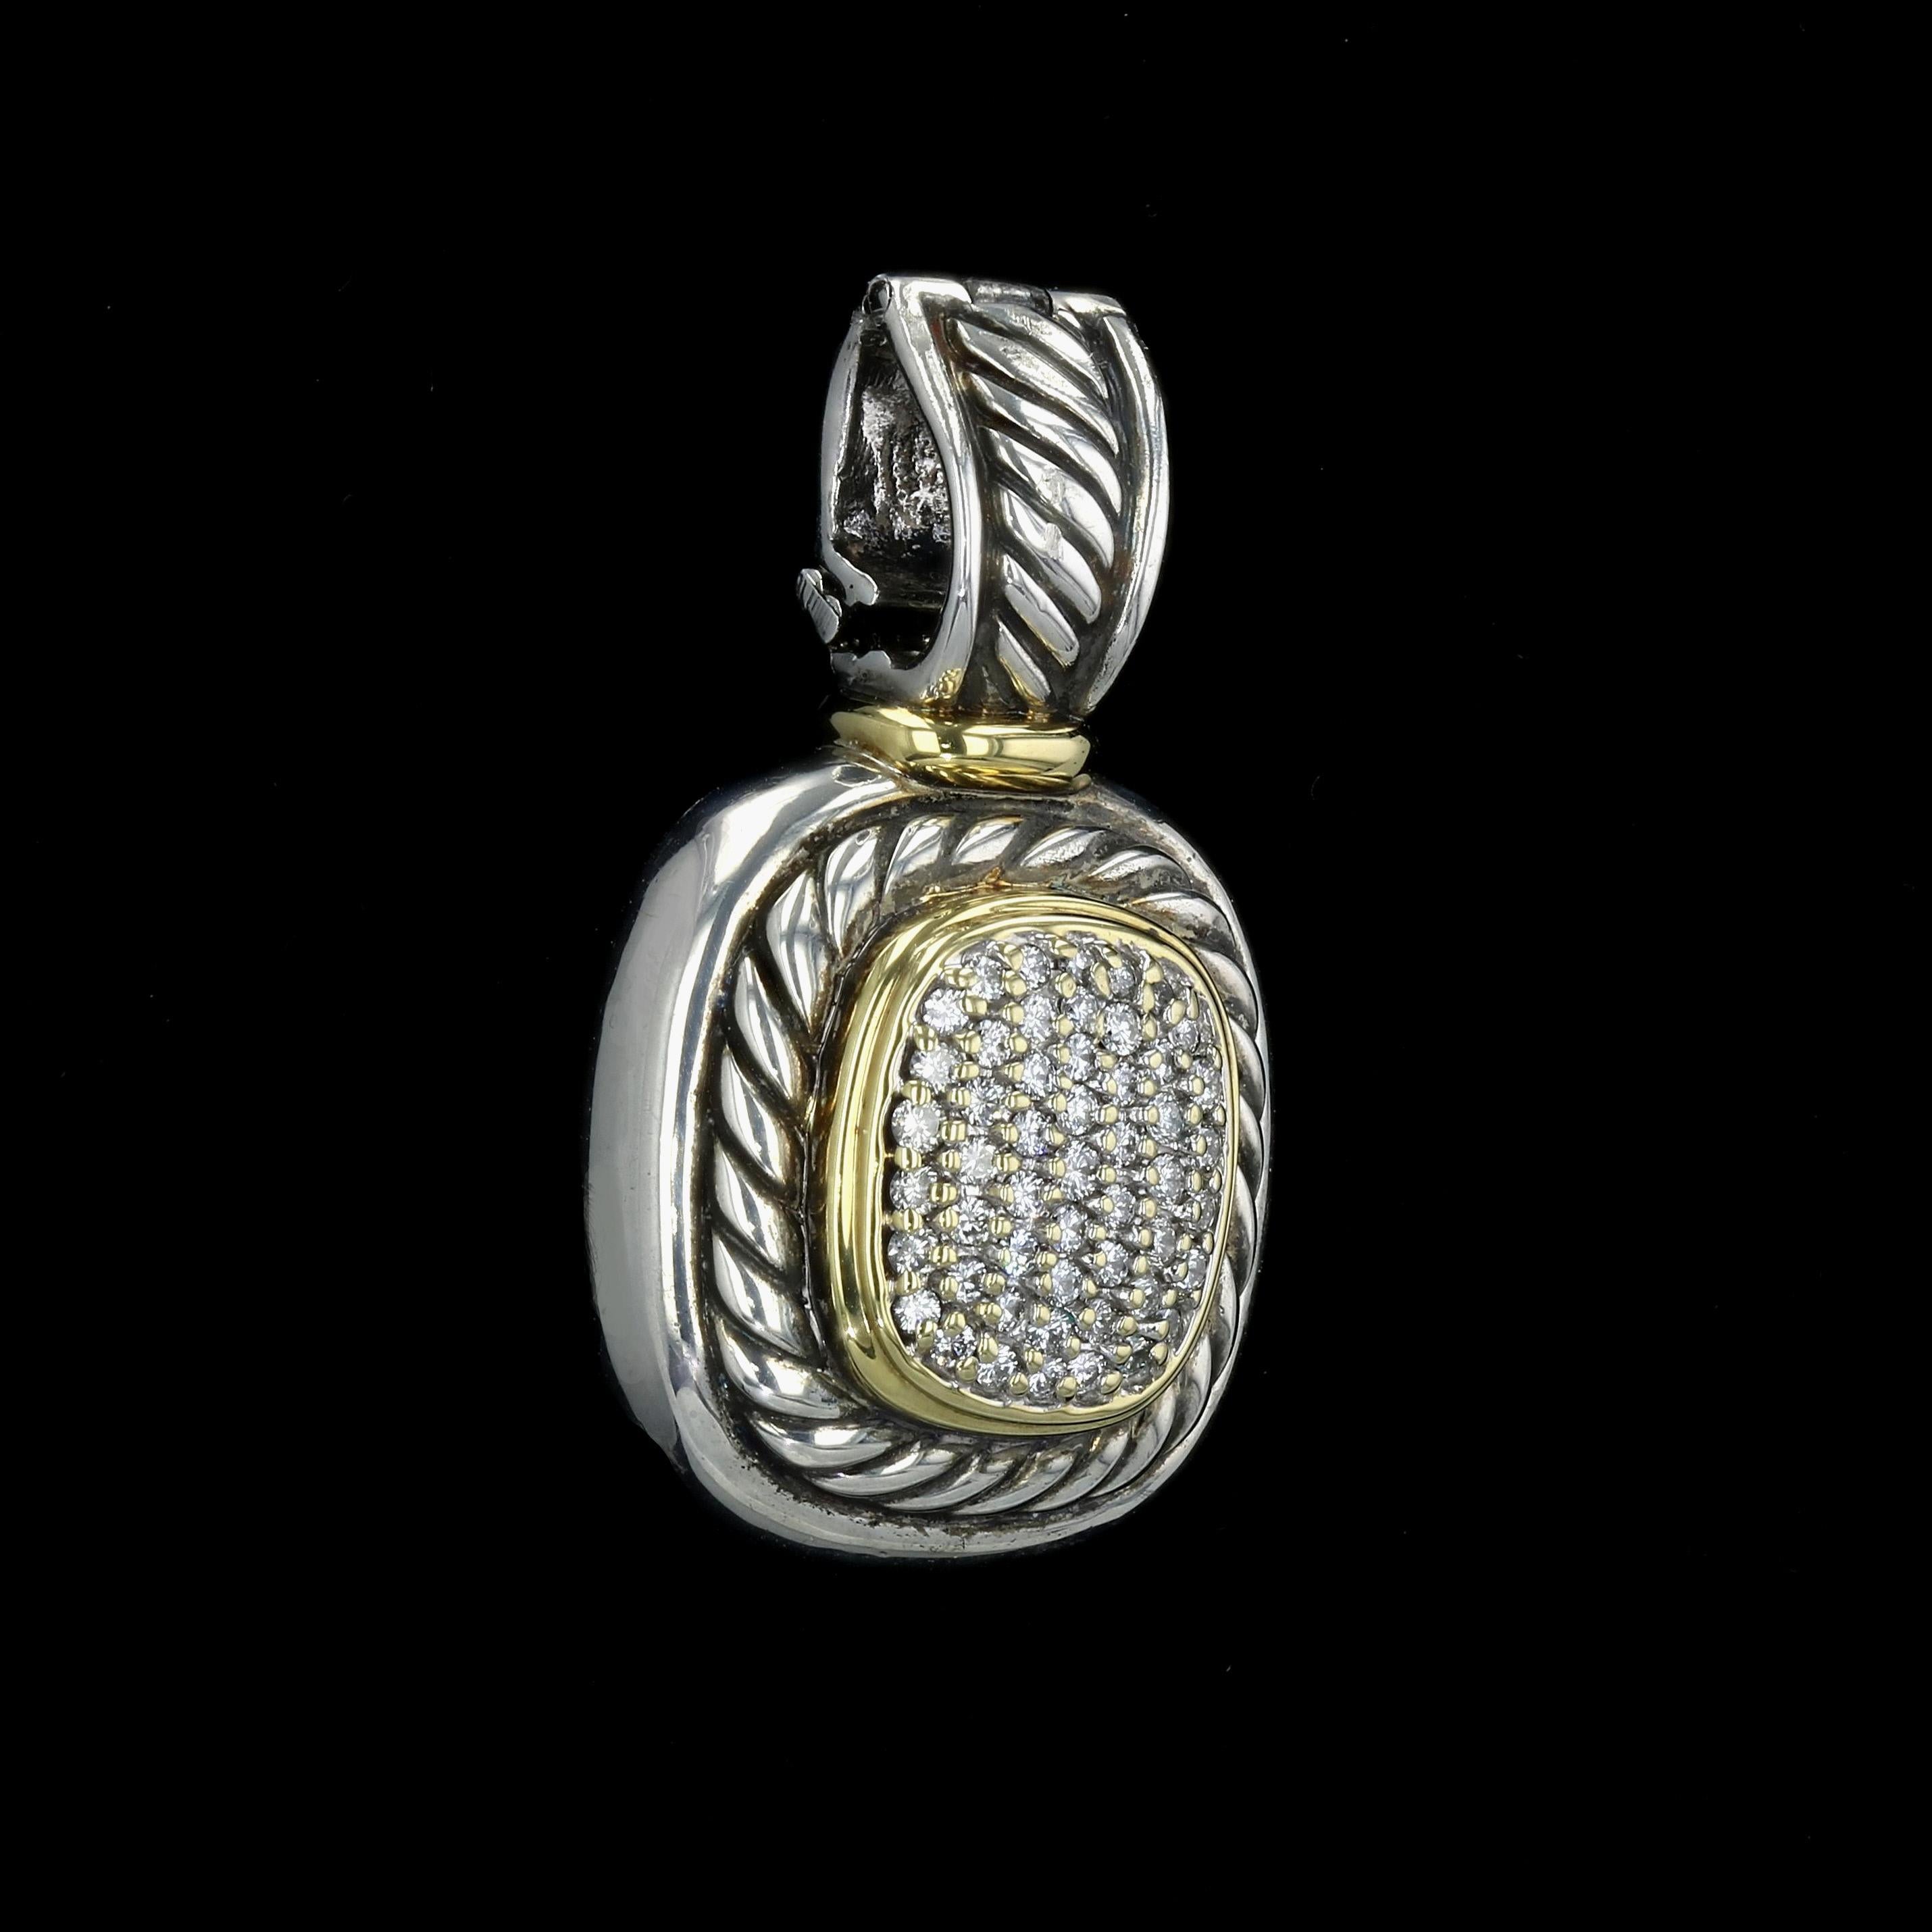 Estate sterling silver David Yurman pendant/necklace enhancer with 18K yellow gold accents. The piece is styled in the quintessential Yurman cable twist design and set with more than 50 round brilliant diamonds. The diamonds have average color of